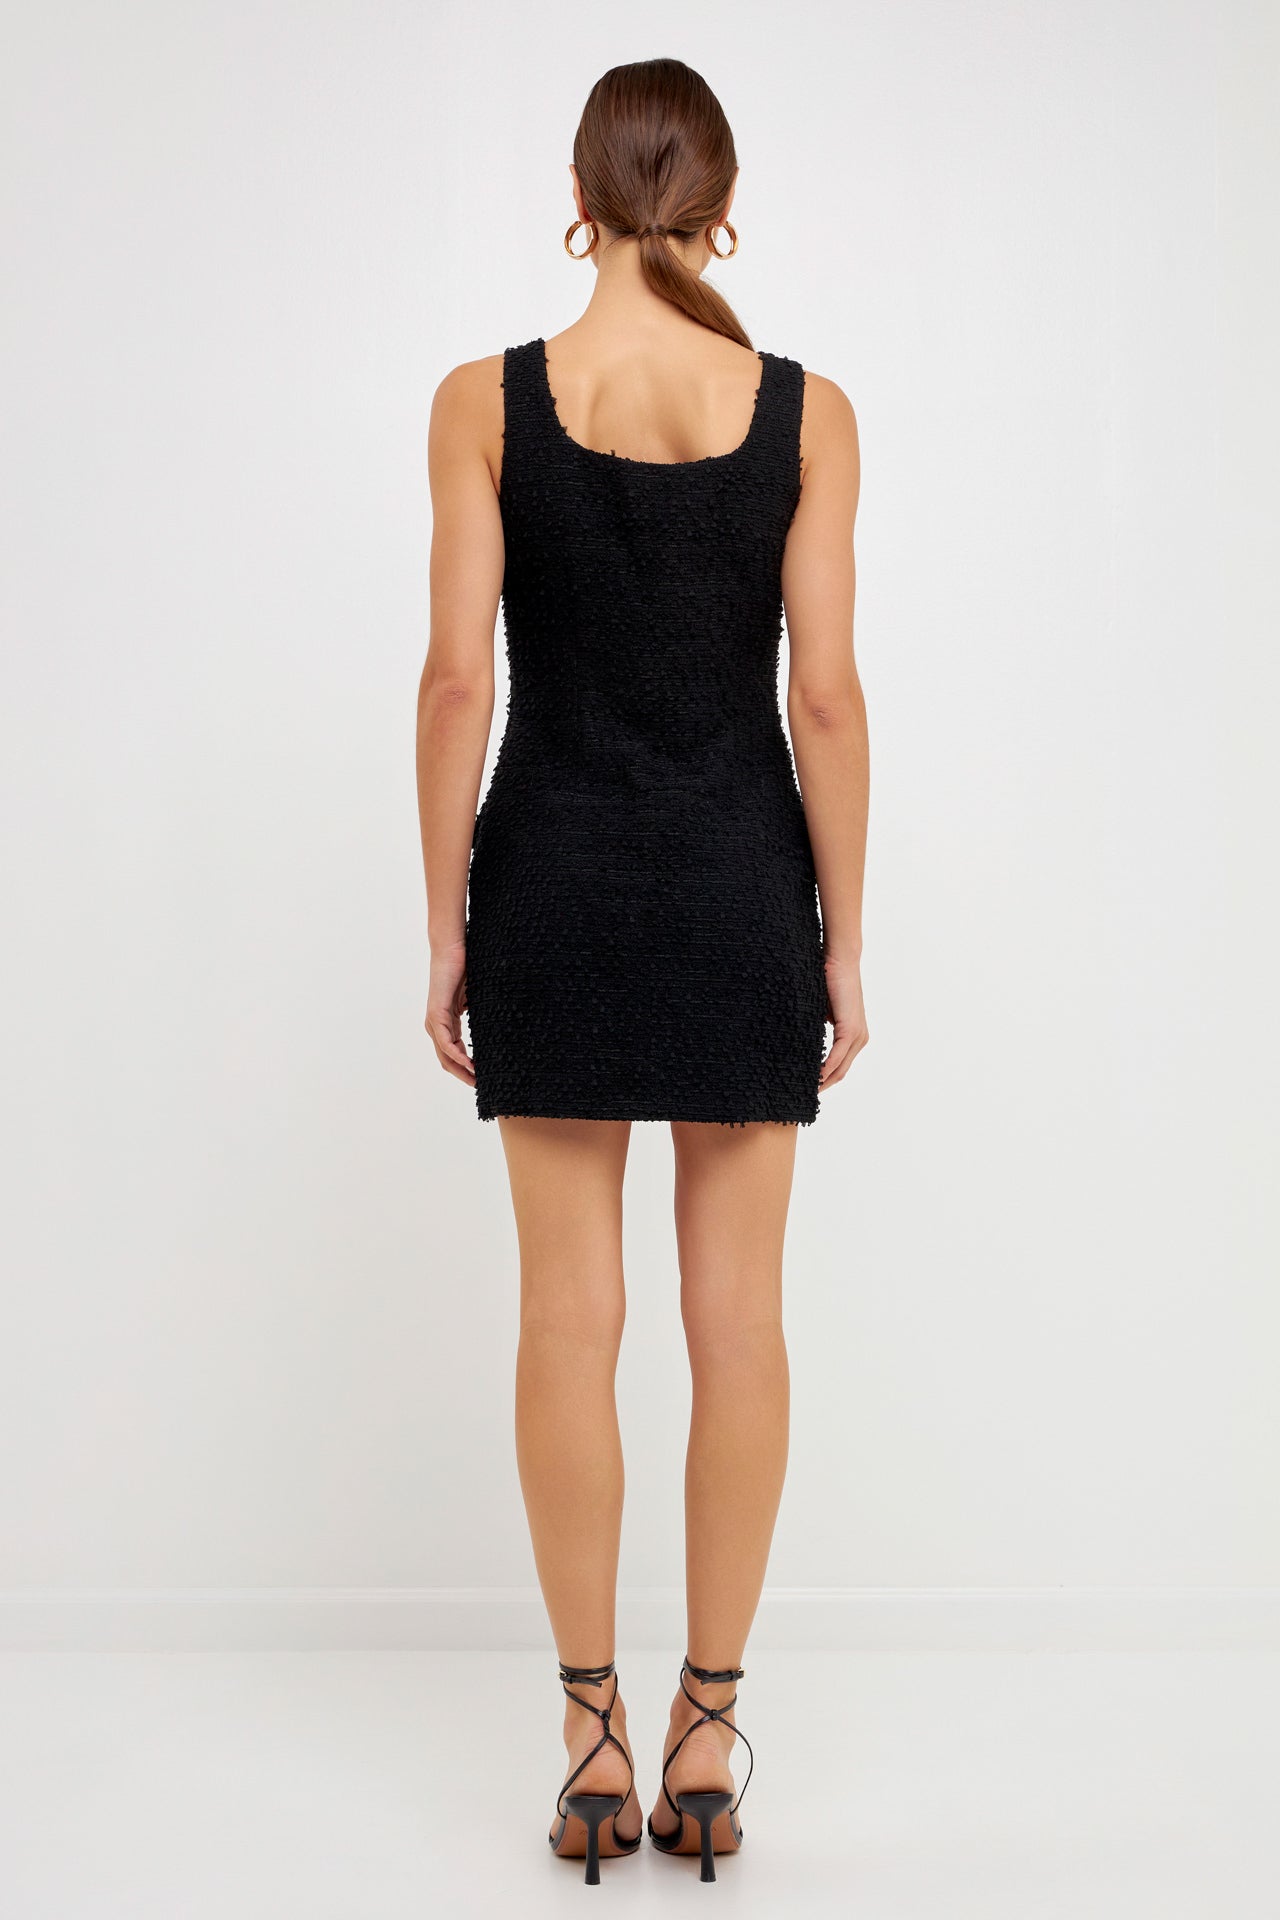 ENDLESS ROSE - Tweed Mini Dress - DRESSES available at Objectrare